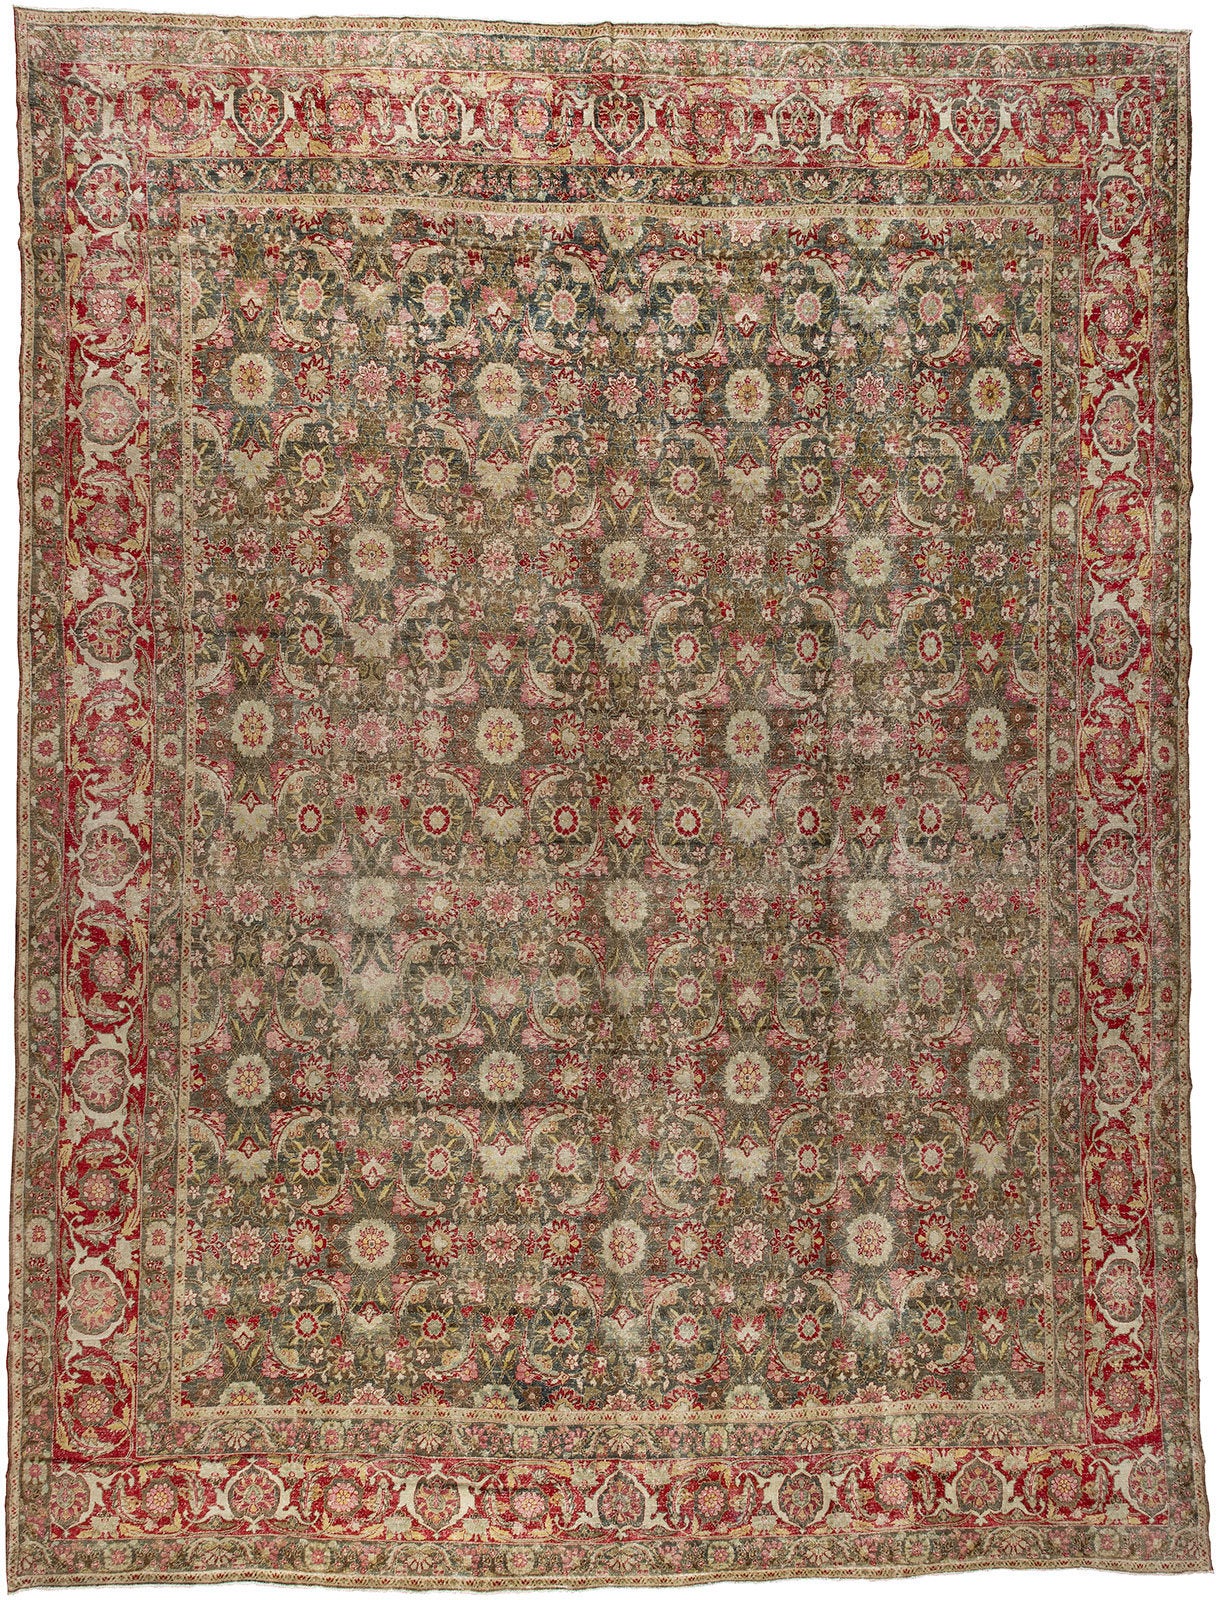 An early 20th century Persian Tabriz rug with a large herati design with raspberry and pink accent colors on a dark green ground

Measures: 13'1'' x 17'8''.